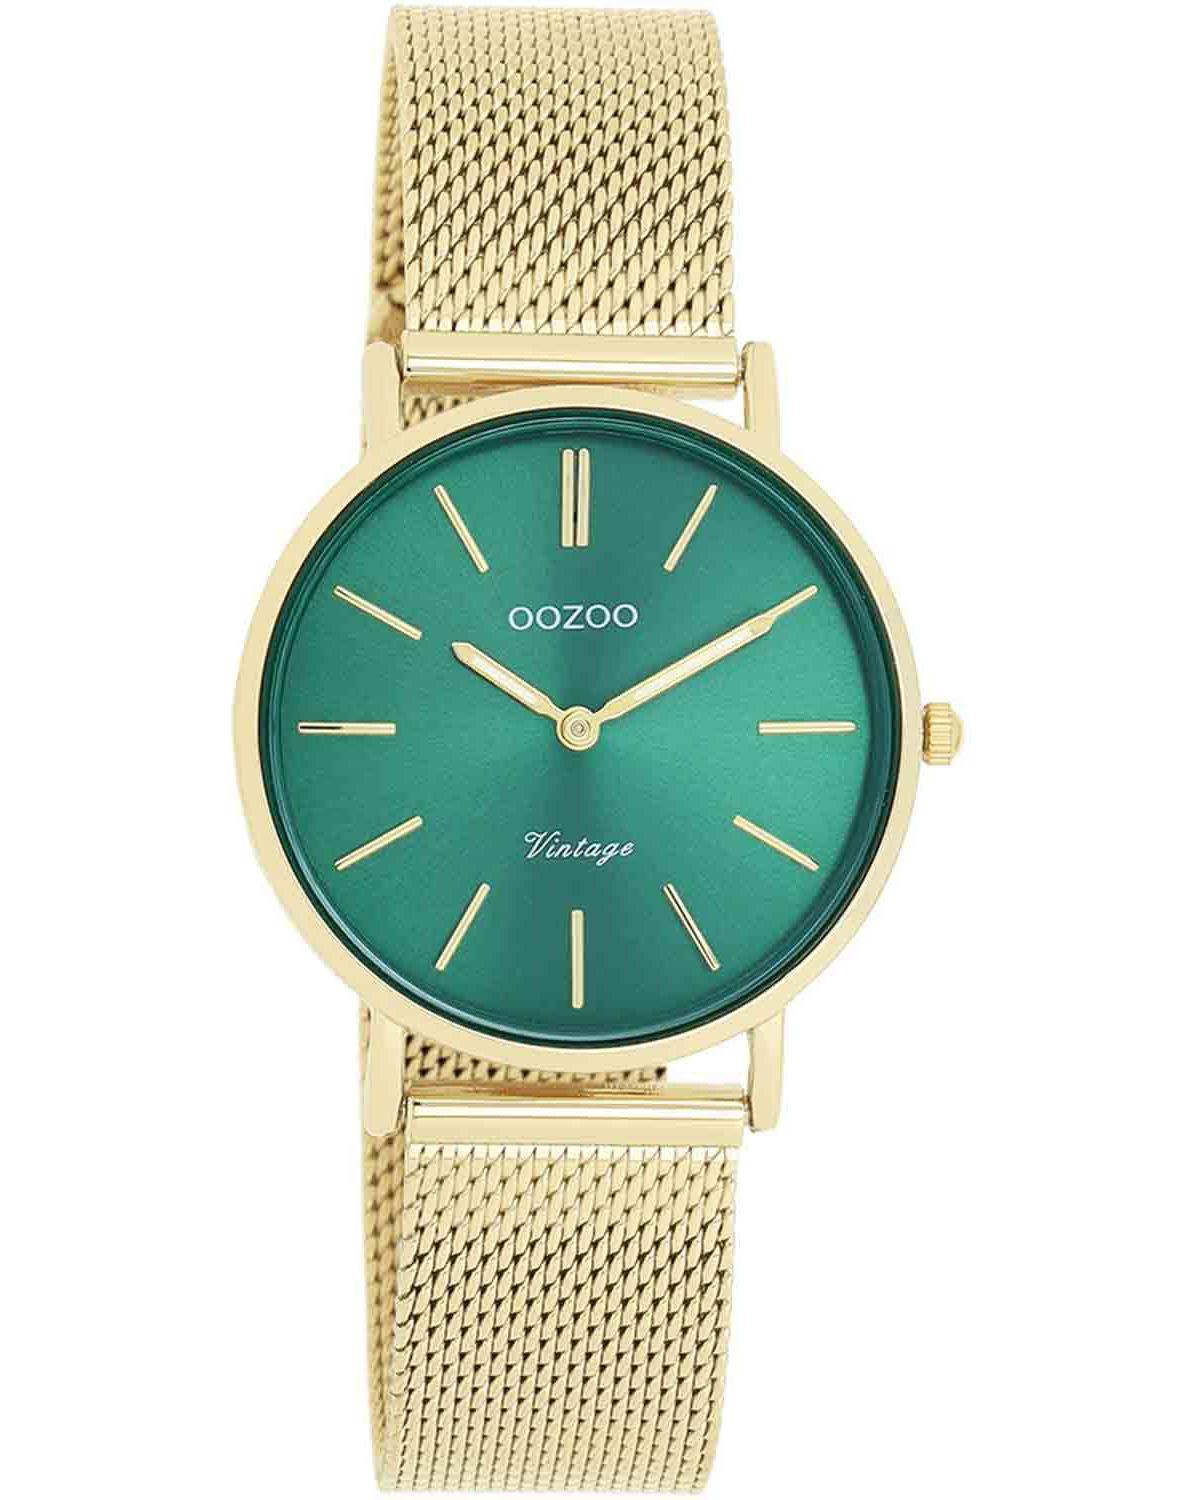 OOZOO Vintage - C20296, Gold case with Stainless Steel Bracelet 30651